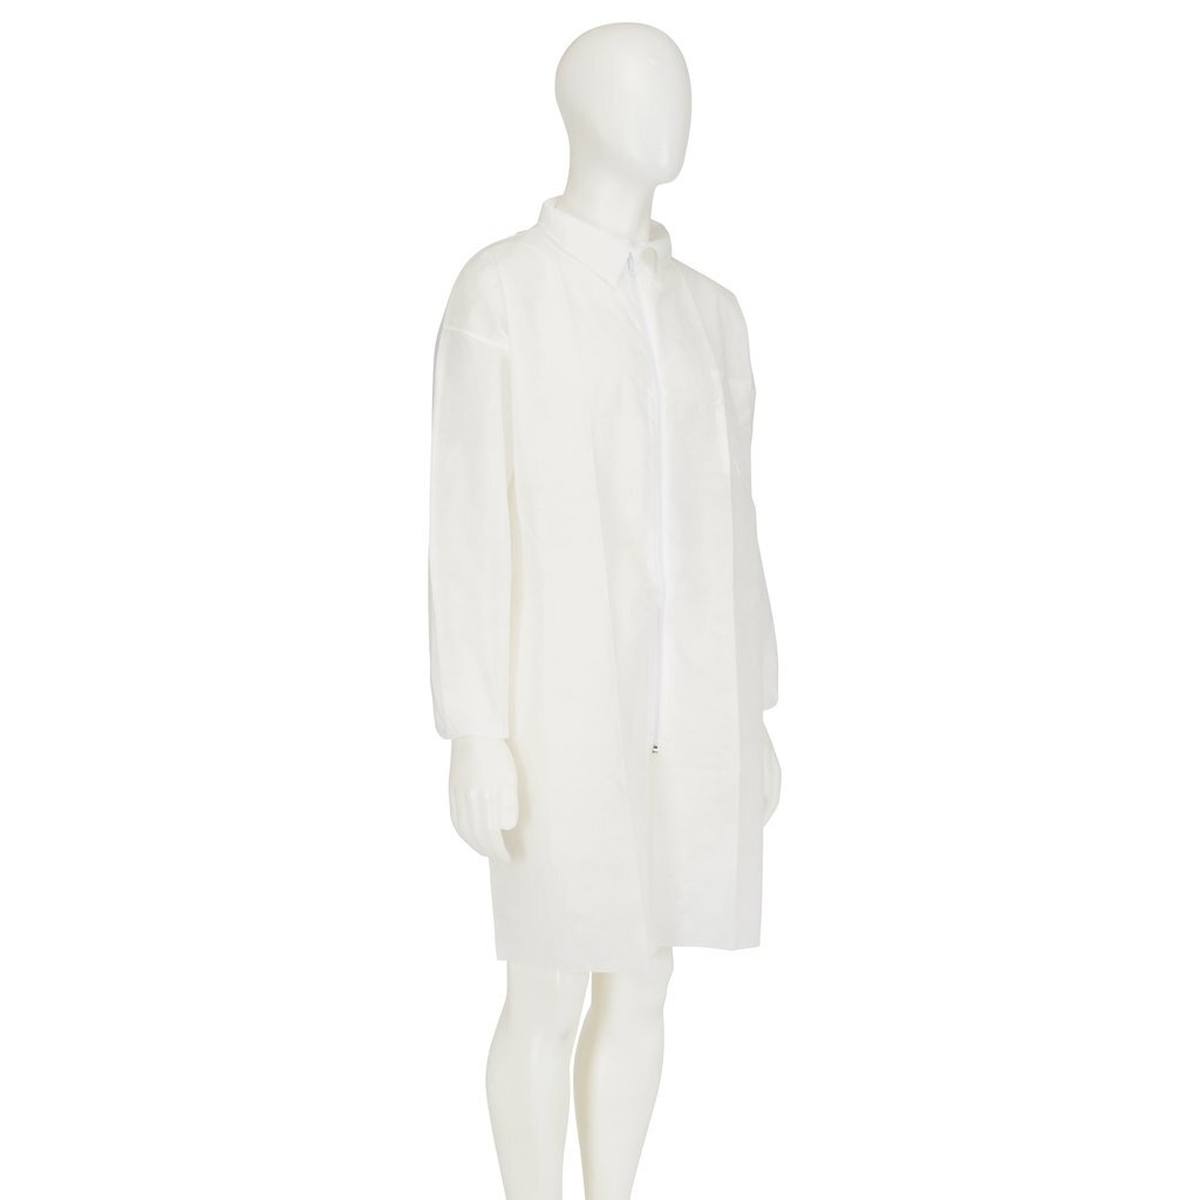 3M 4400 Coat, white, size 4XL, material 100% polypropylene, breathable, very light, with zip